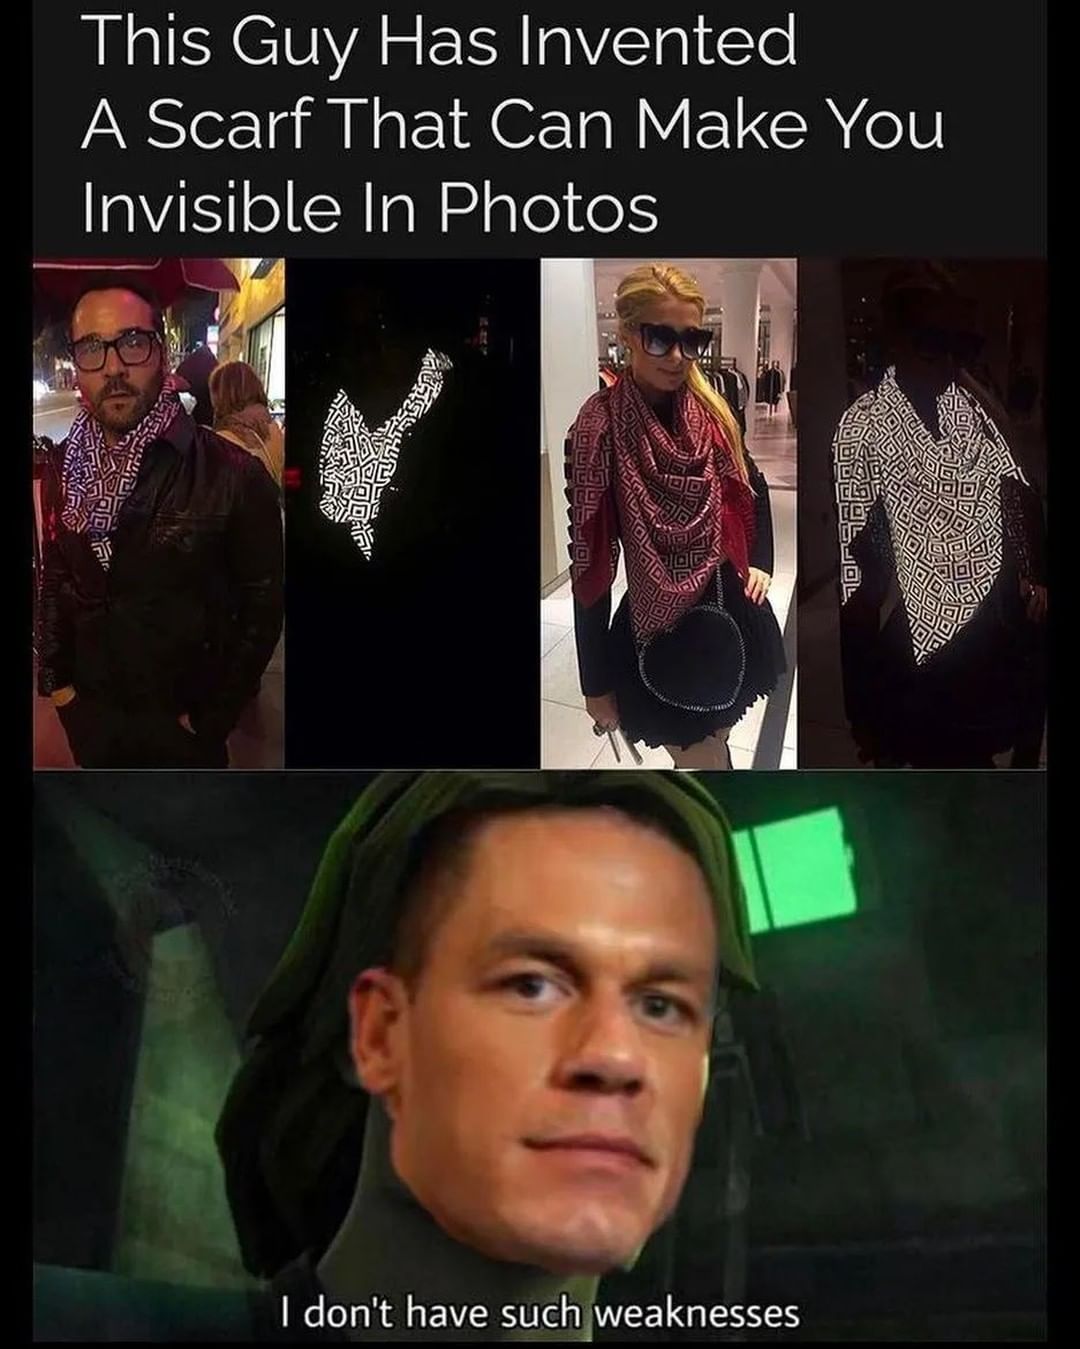 This guy has invented a scarf that can make you invisible in photos. I don't have such weaknesses.